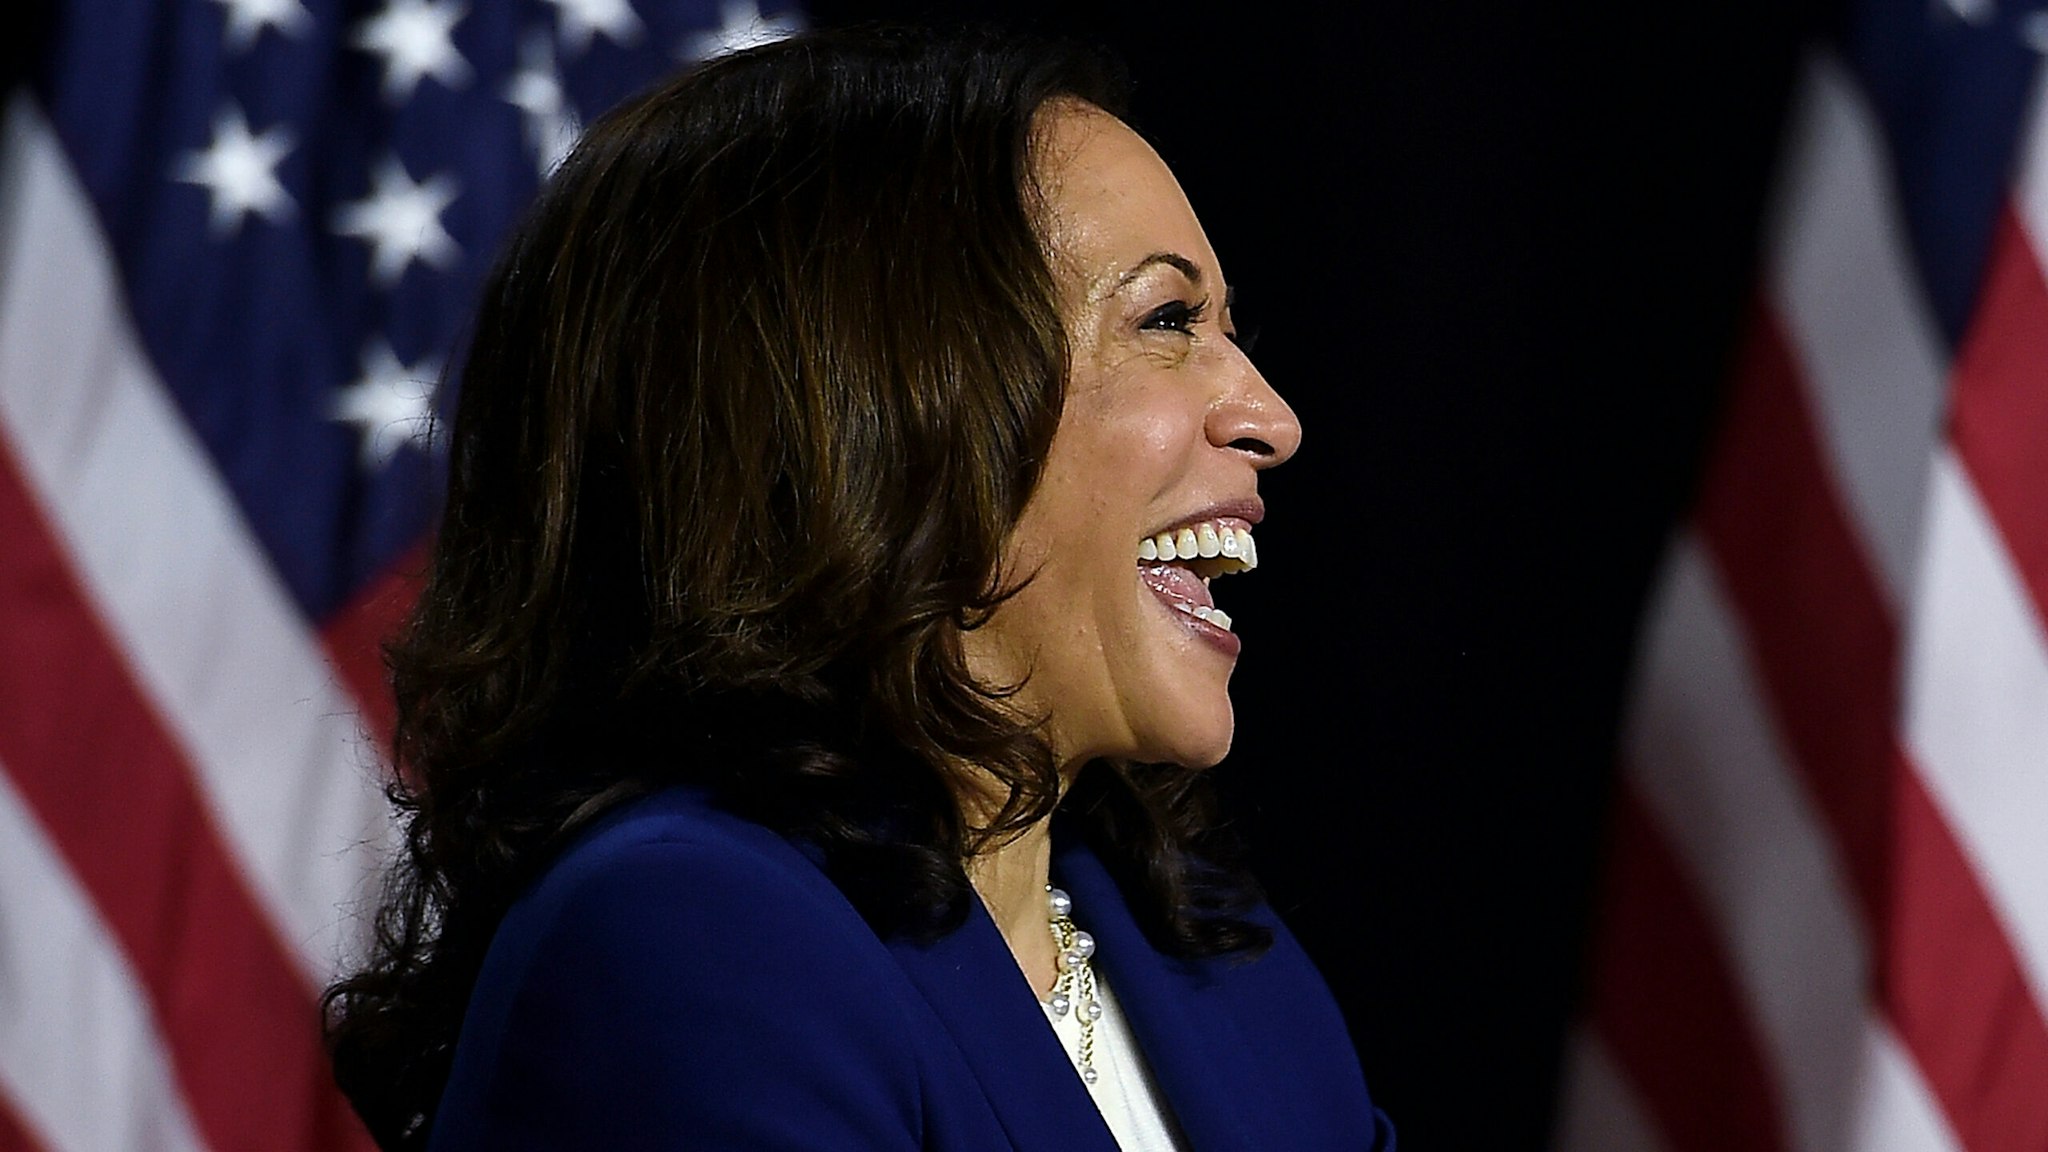 Democratic vice presidential running mate, US Senator Kamala Harris, laughs as she listens to presidential nominee and former US Vice President Joe Biden speak during their first press conference together in Wilmington, Delaware, on August 12, 2020.